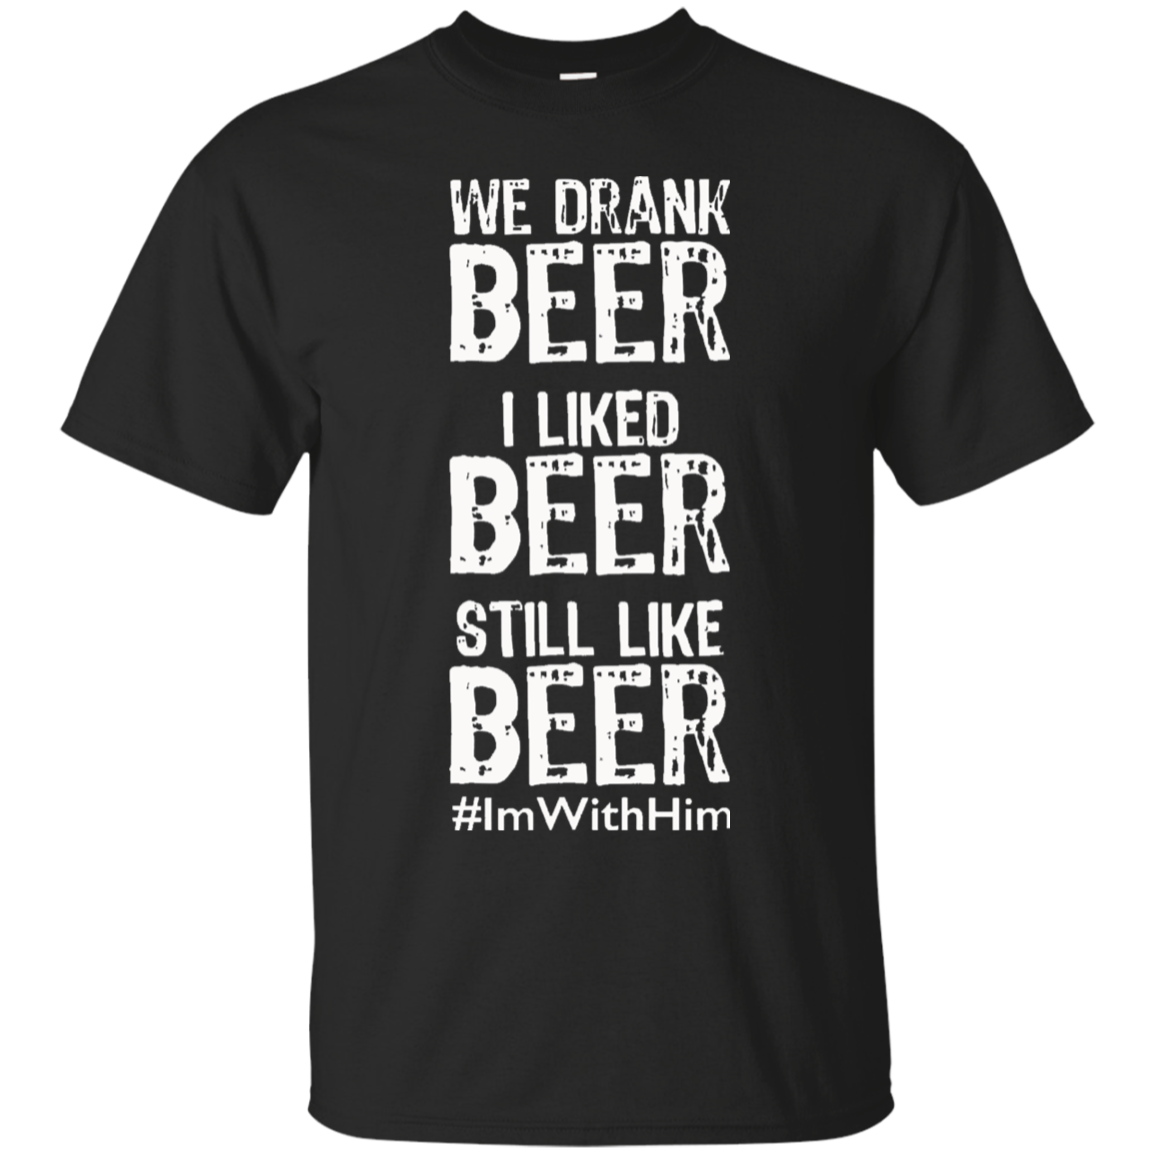 We Drank Beer I Liked Beer Still Like Beer #imwithhim T-shirt